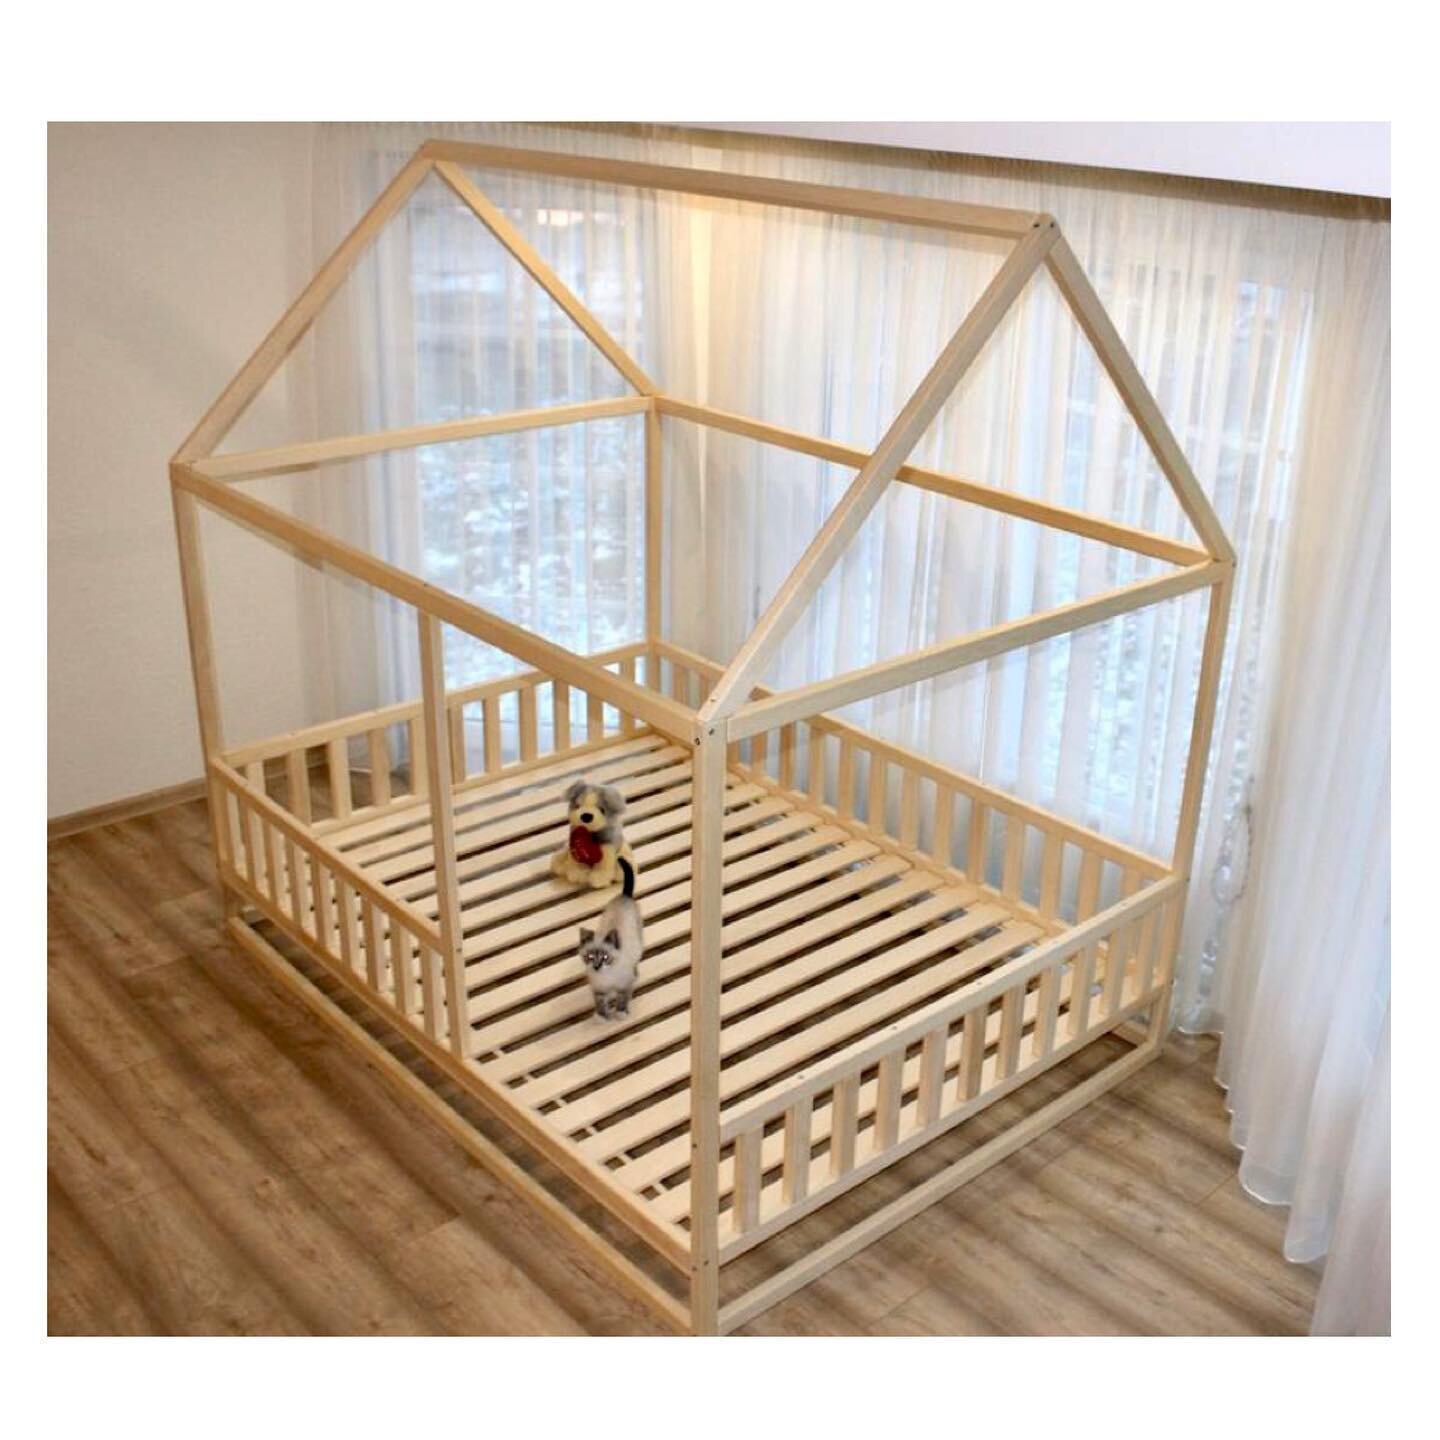 First project lined up for the new shop early 2020 - a big girl bed for my little sweetie (adorable), built with wood chopped down from our backyard trees (manly). Draped in floral and accent lighting, of course! Love me a good winter project - stay 